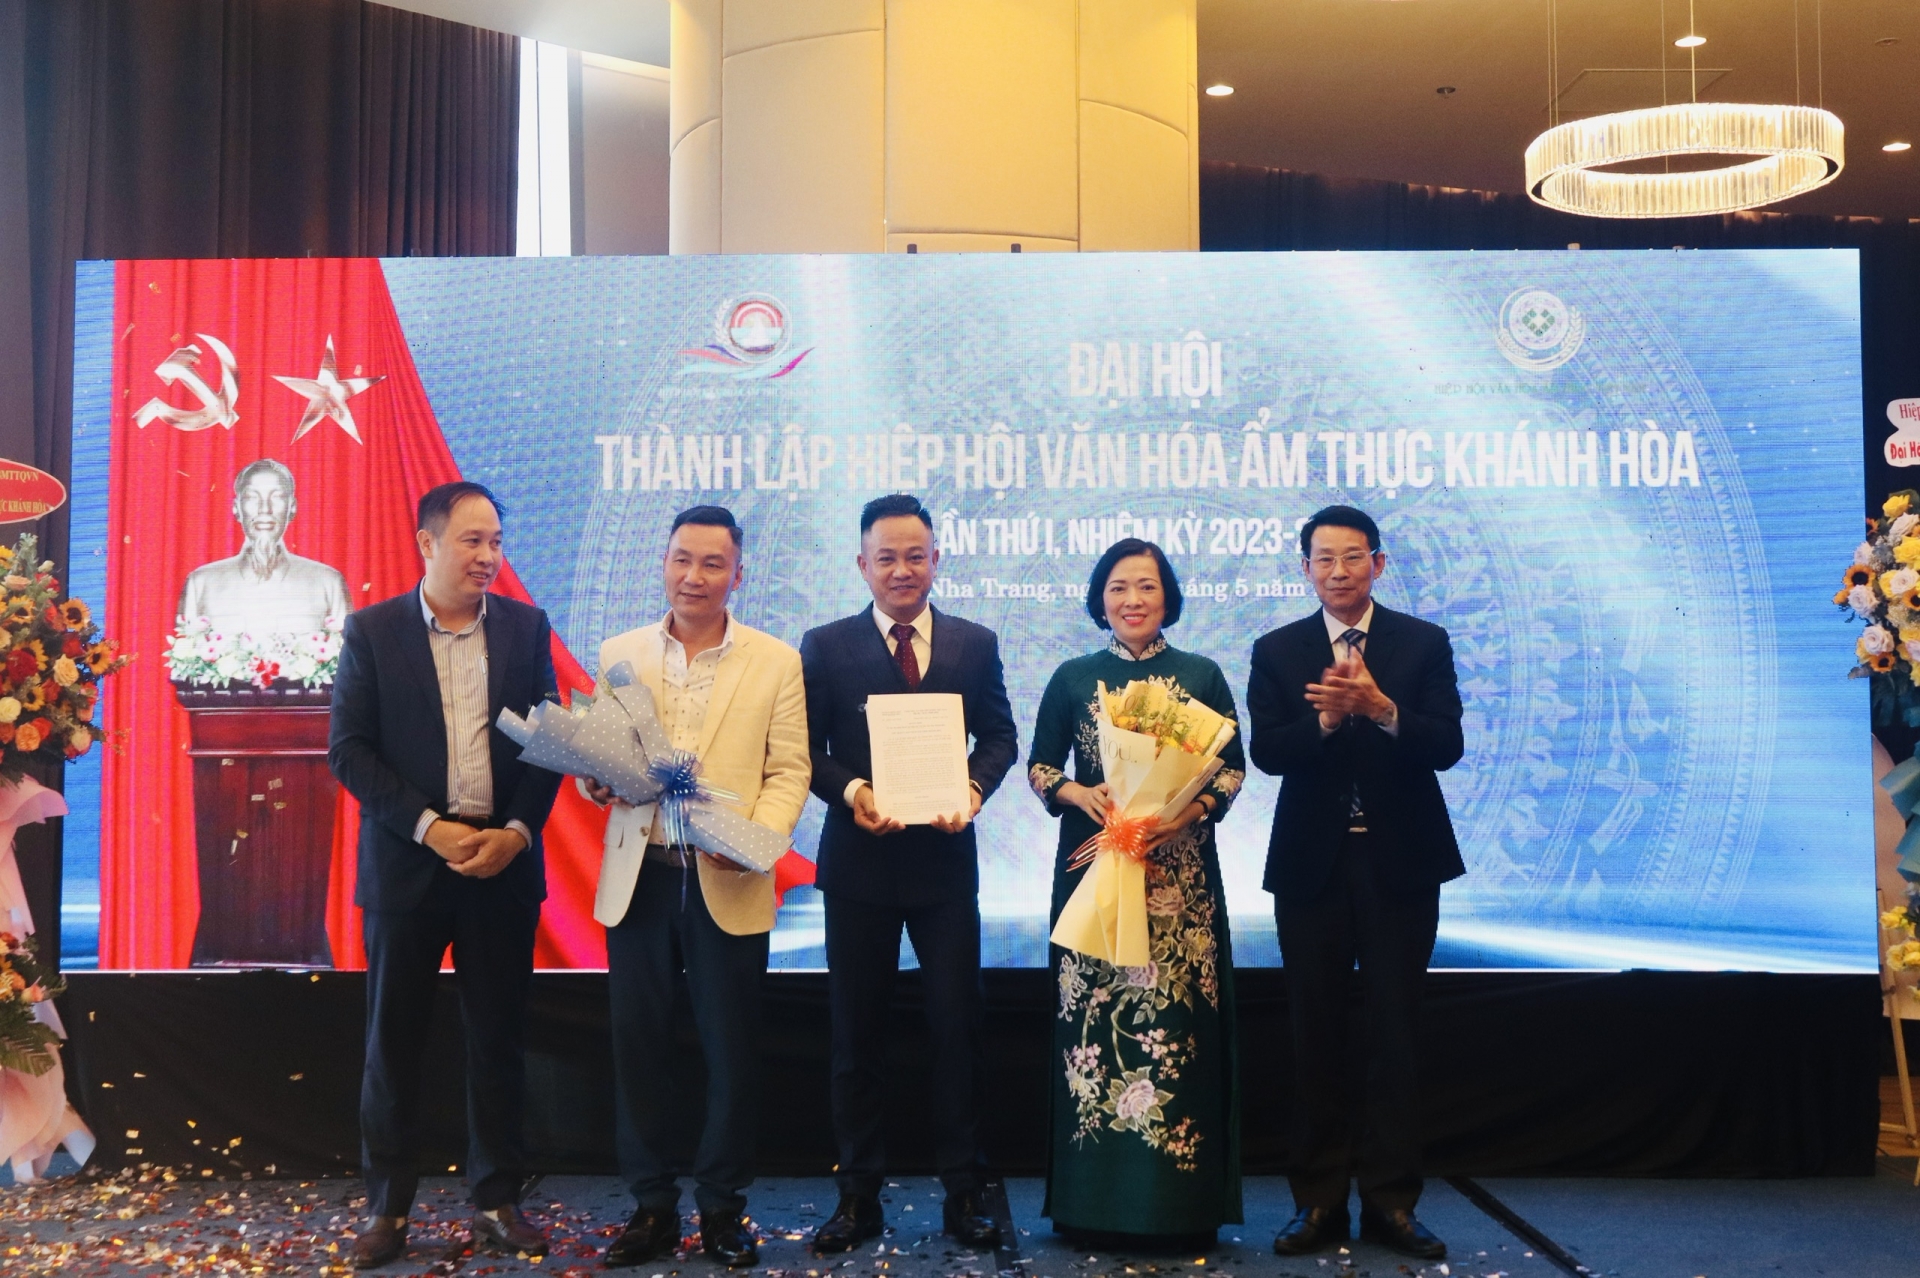 Dinh Van Thieu presents approval decision of the Chairman of Khanh Hoa Provincial Peoples Committee to Khanh Hoa Cuisine Culture Association

